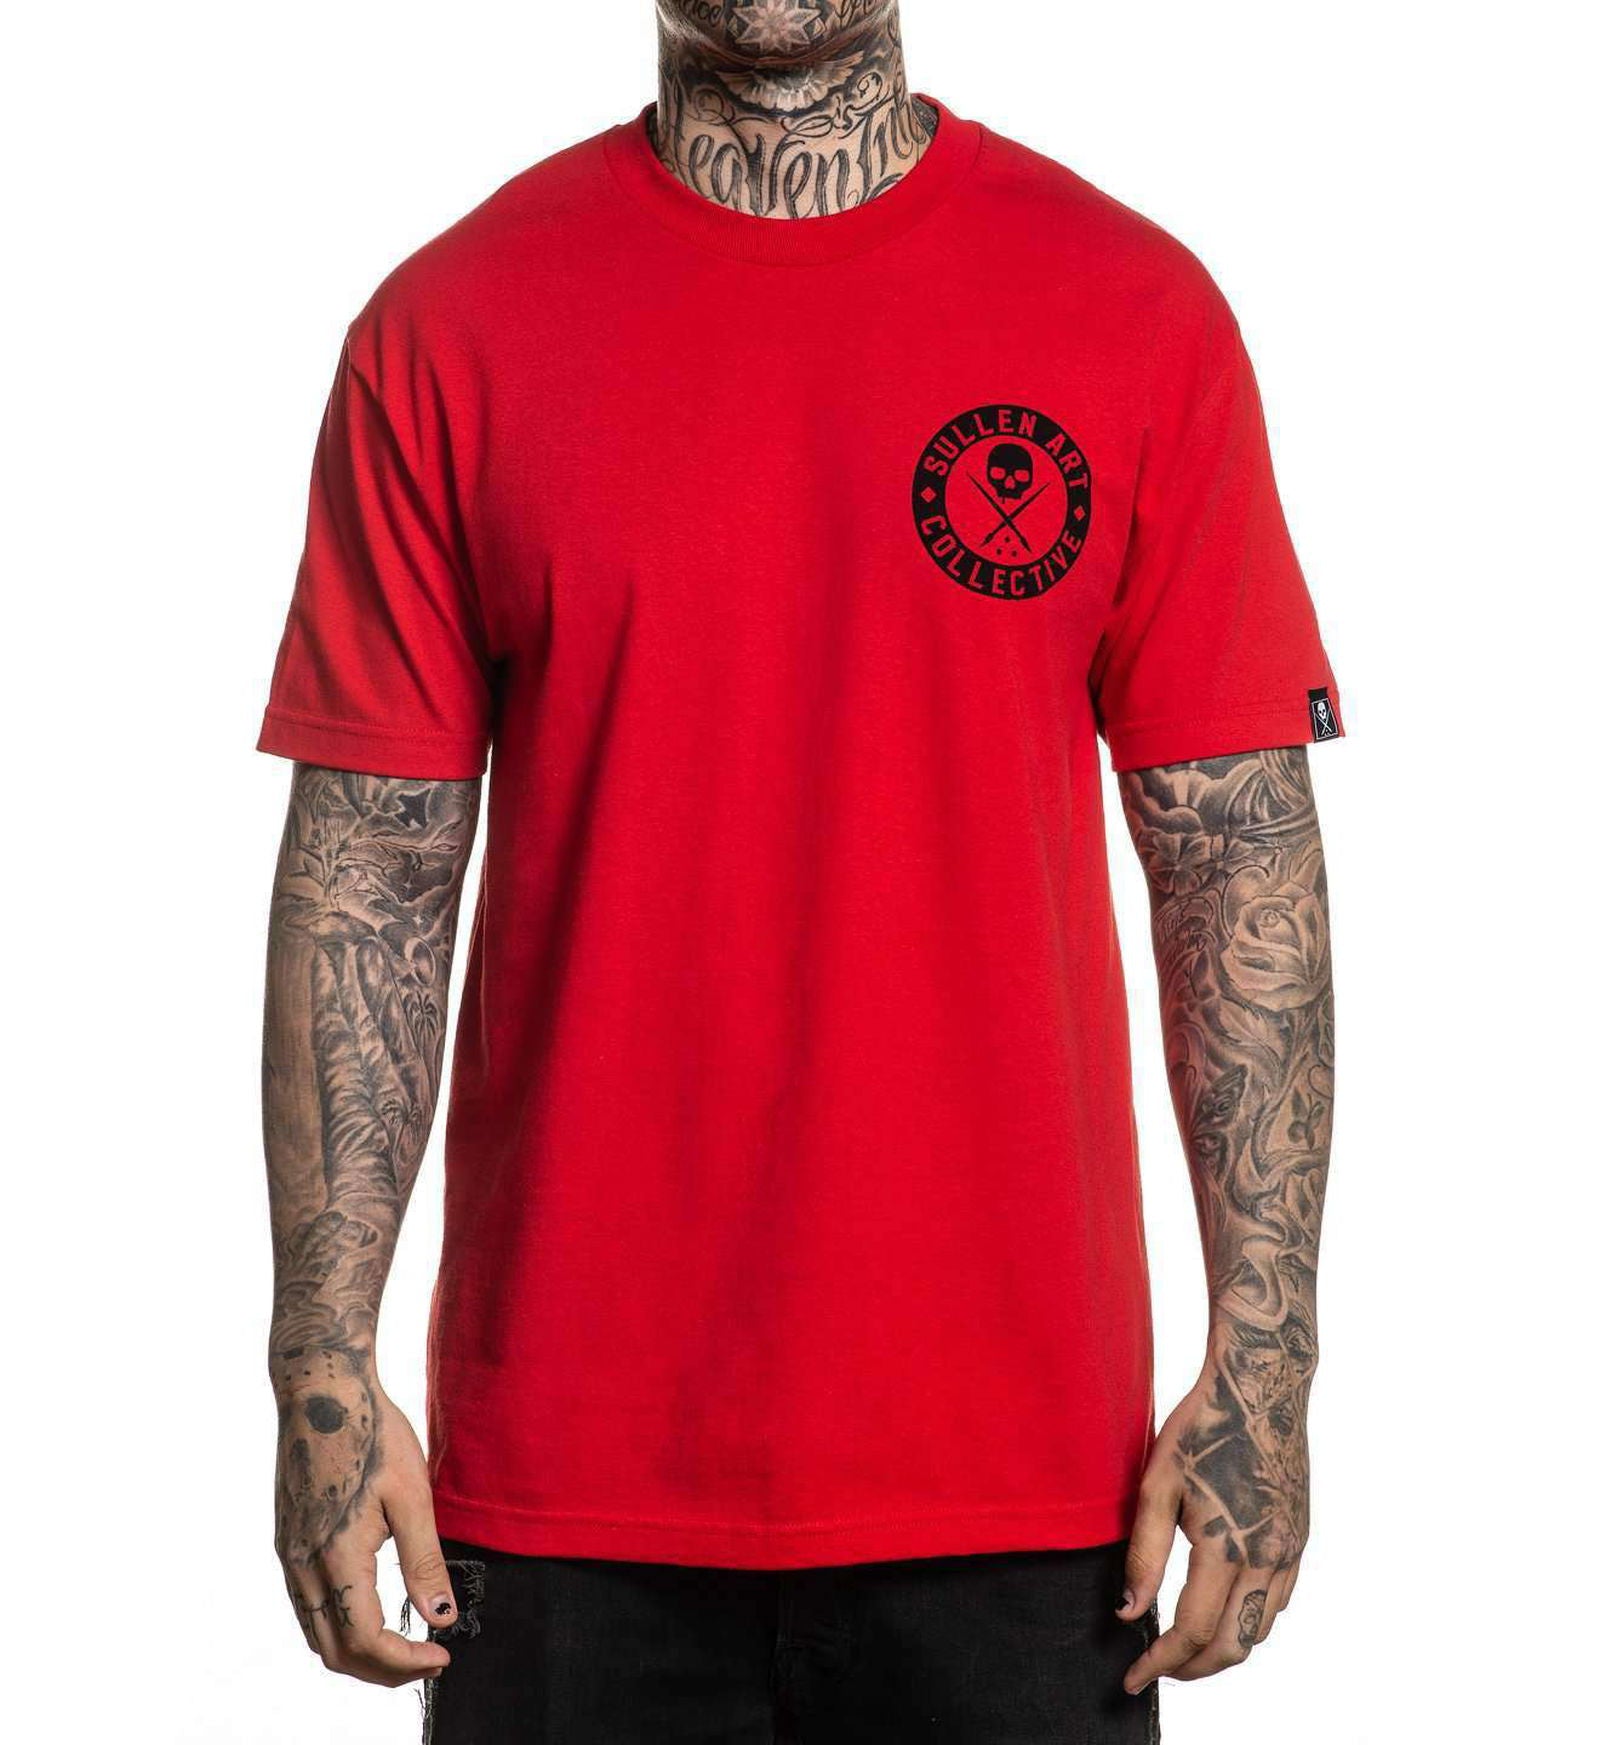 The Classic Red Tee - 